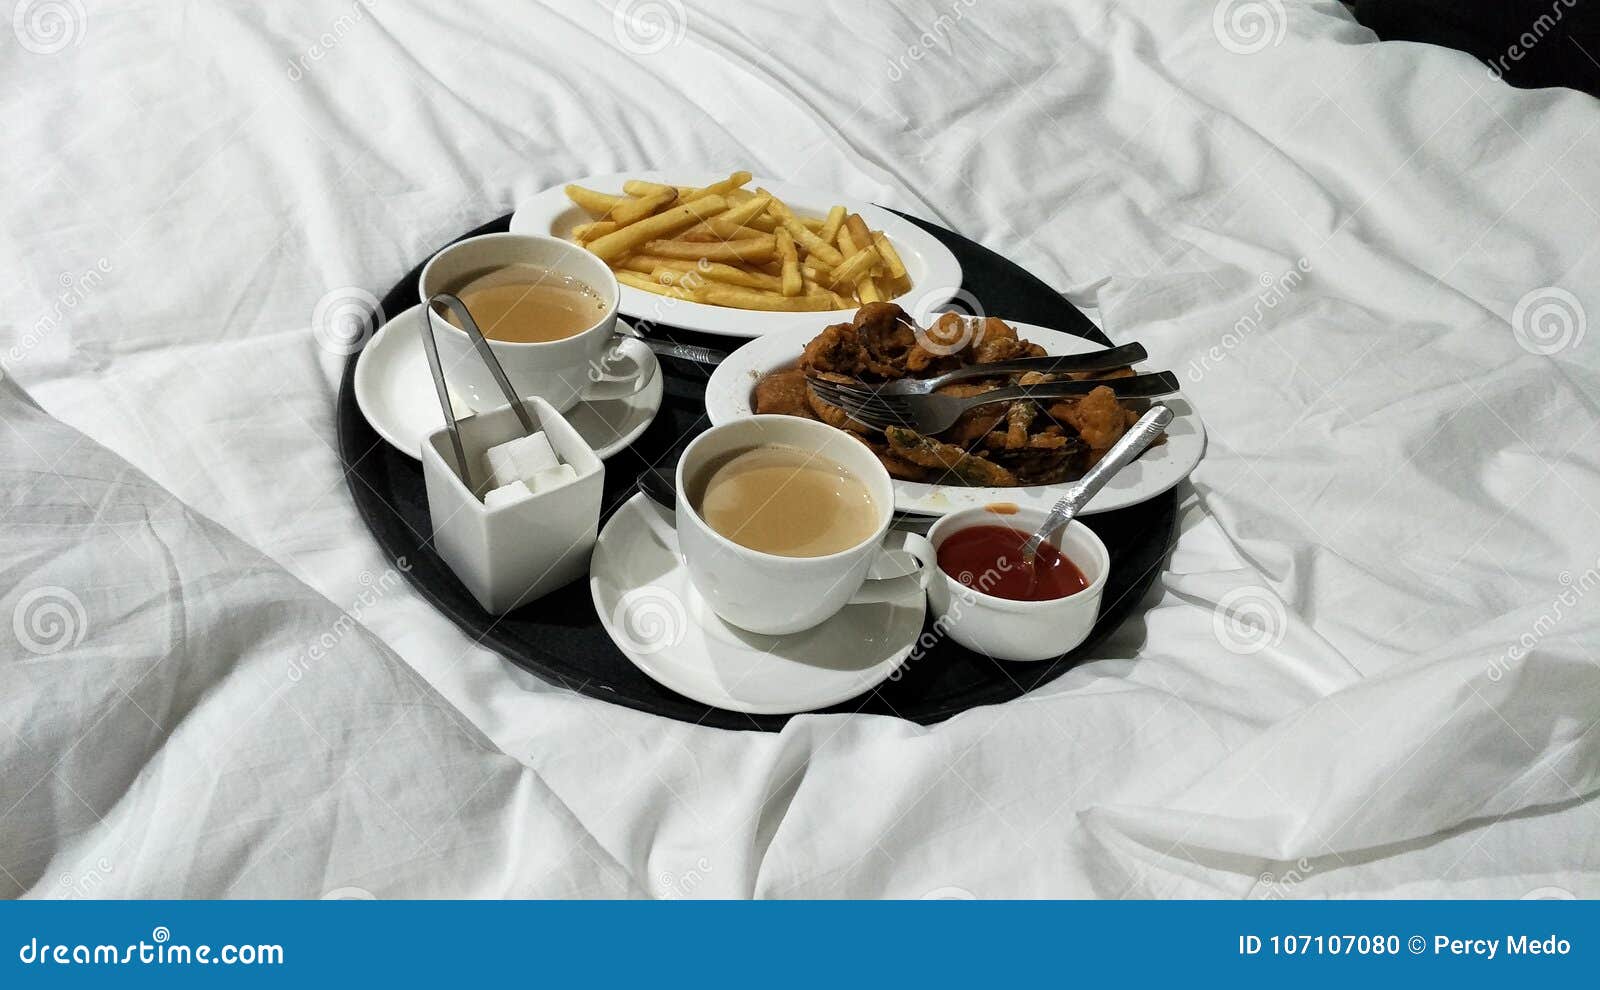 Good Morning Breakfast Tea Frenchfries Bed Couple Stock Photo ...